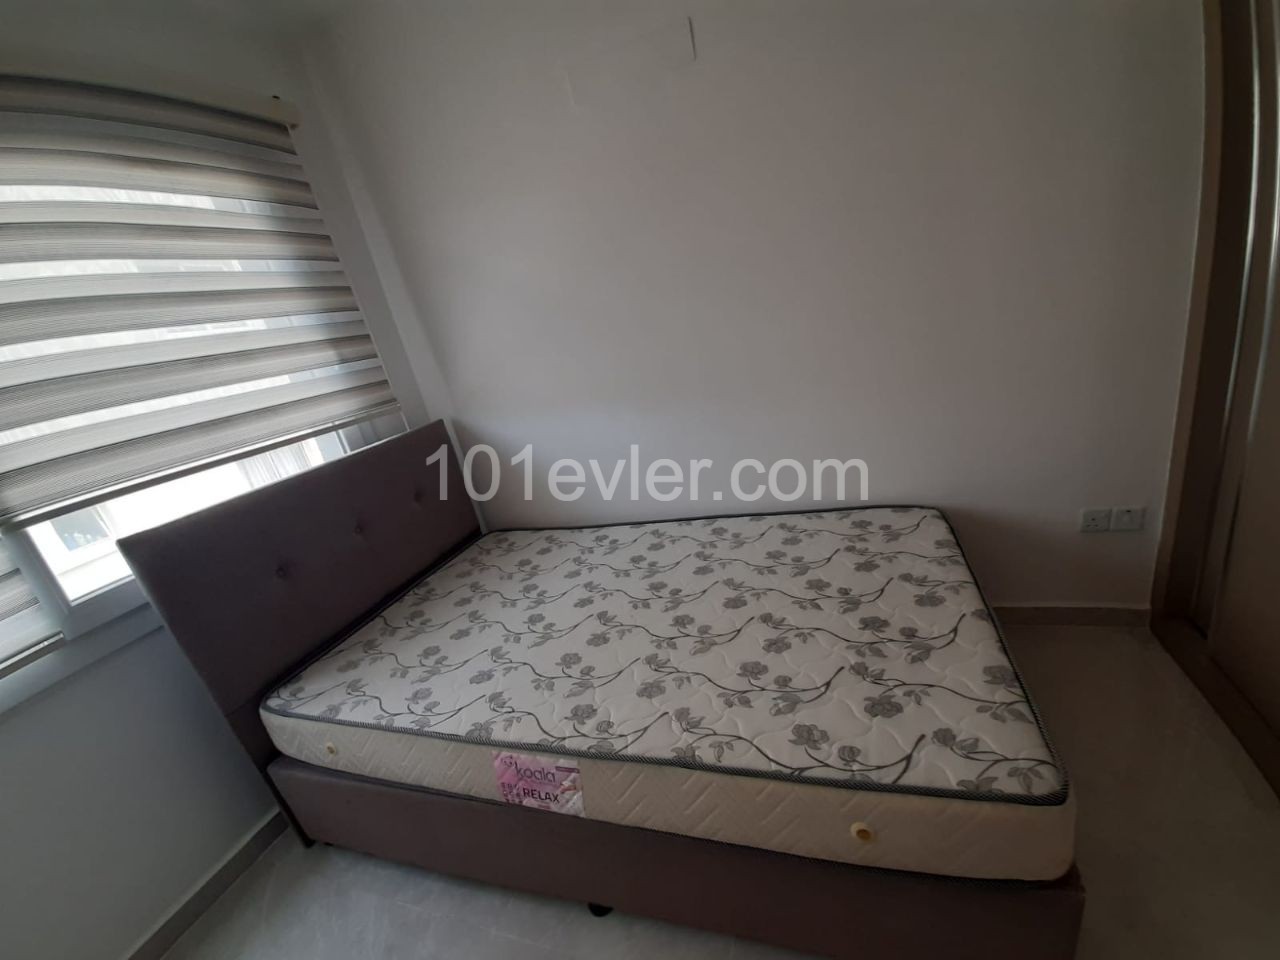 Sakarya 2+1 rent house New home new apartment 10 months payment 4000$ Deposit 400$ Commission 400$ ** 